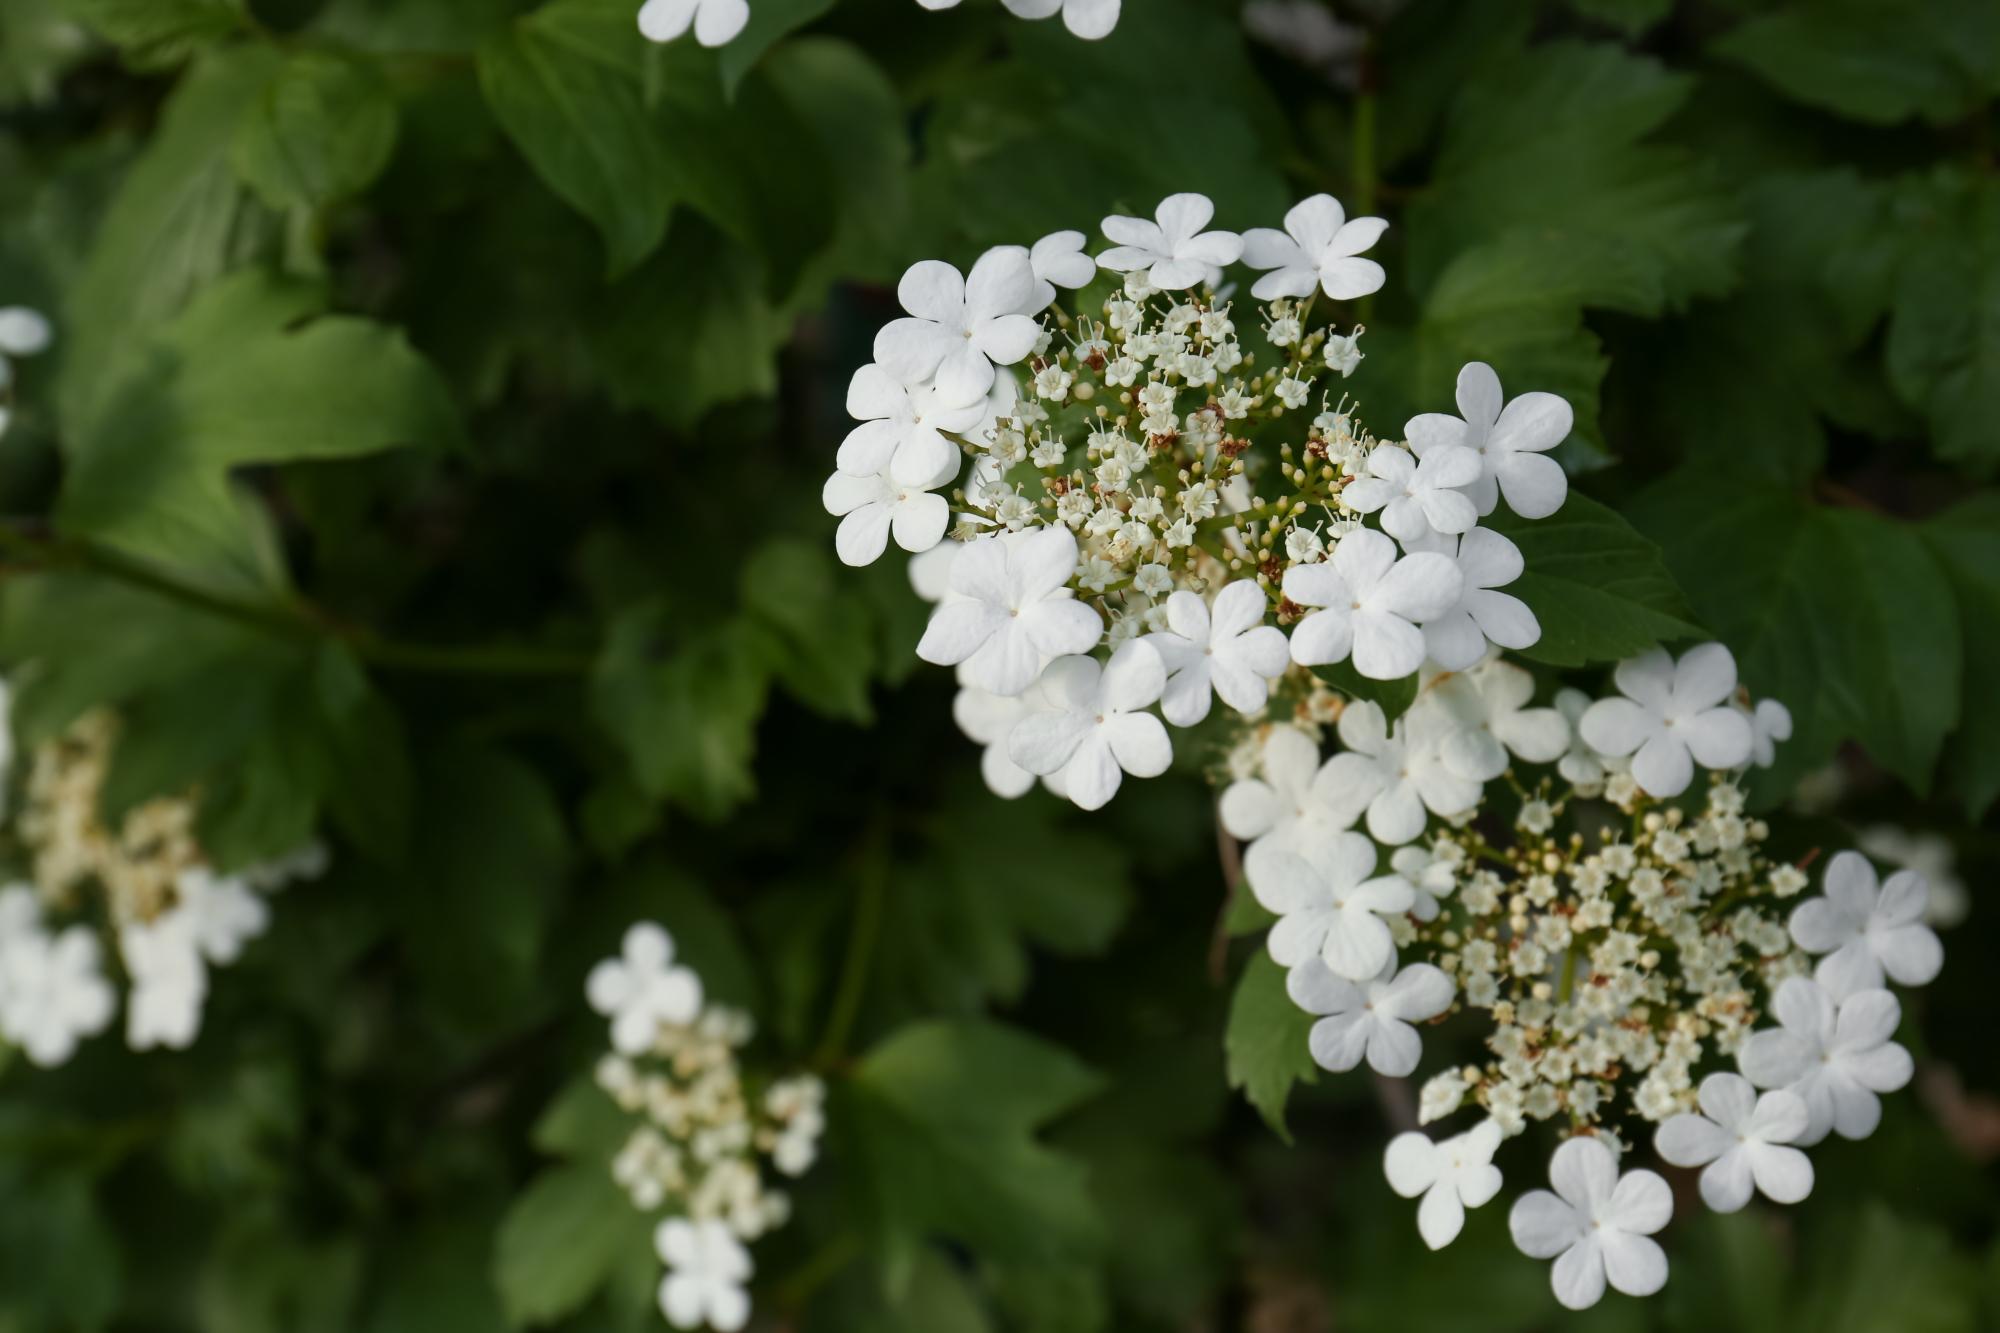 guelder rose flowers with a dark leafy background